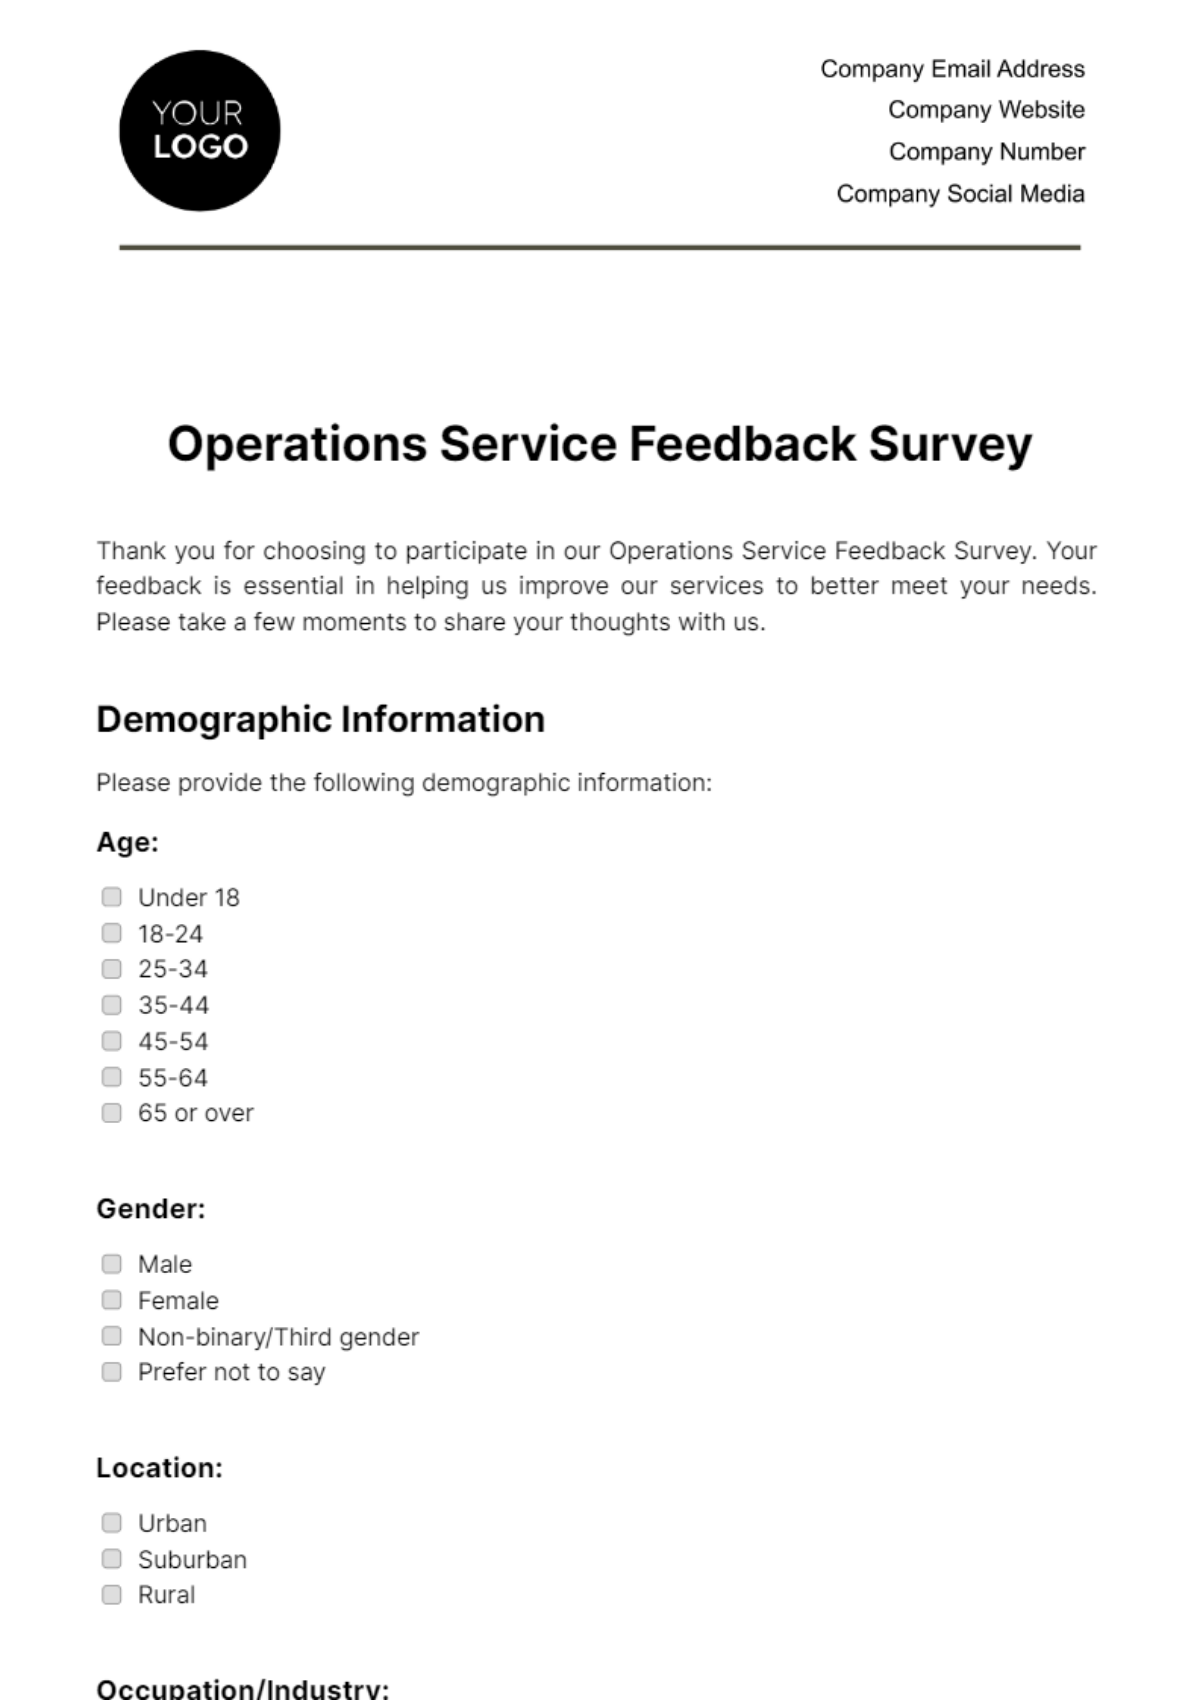 Operations Service Feedback Survey Template